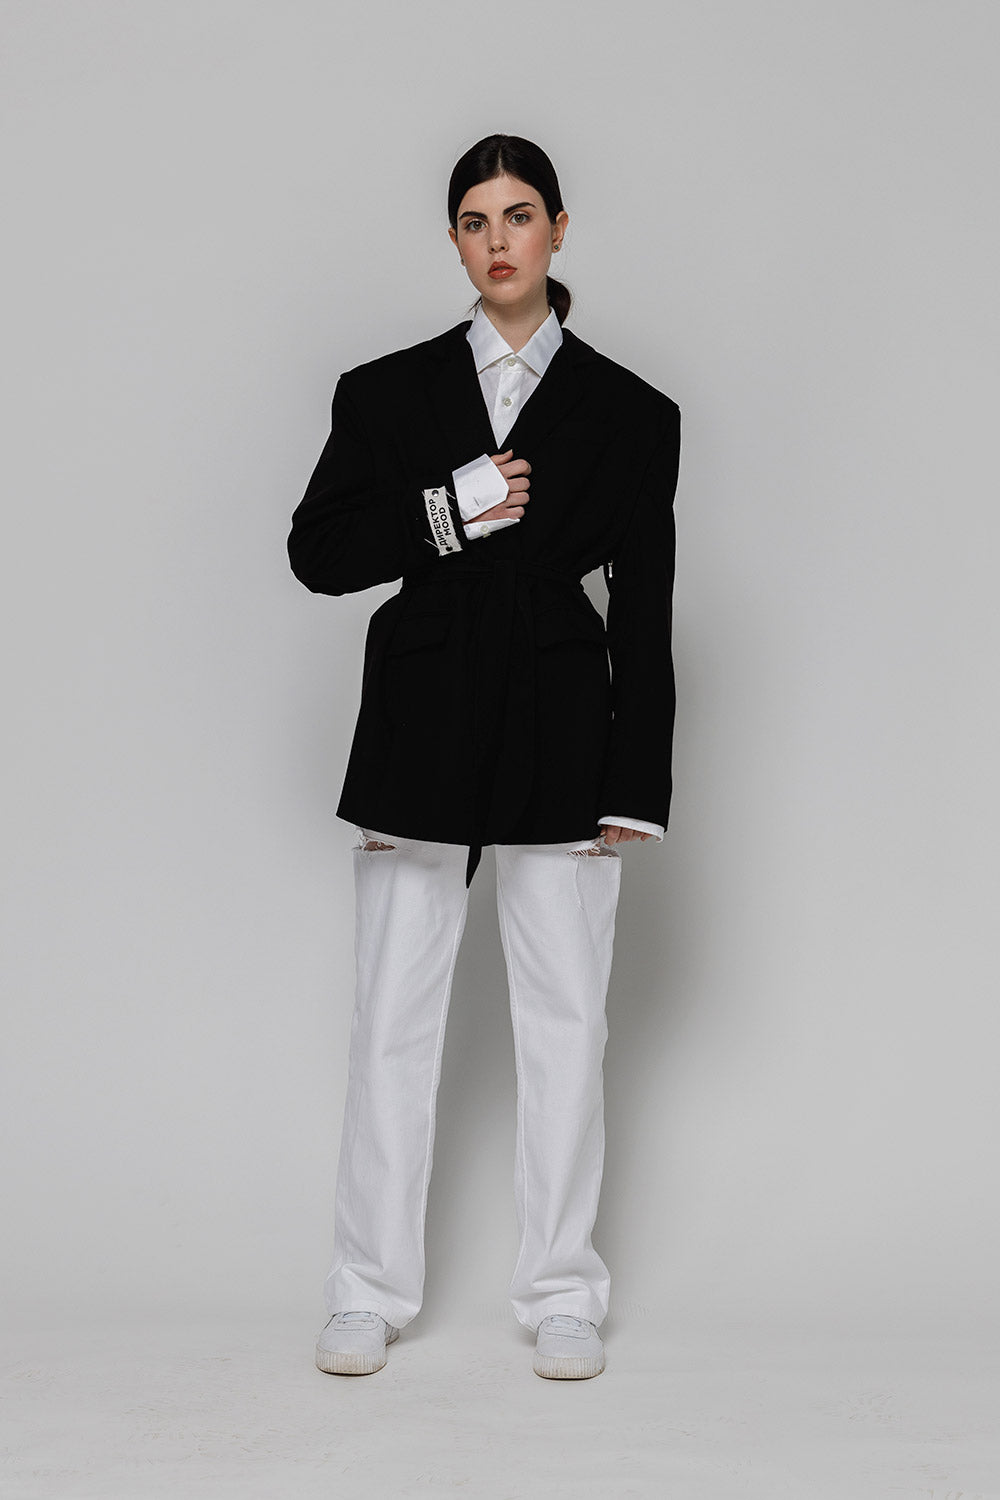 Crepe jacket-constructor in classical black front view